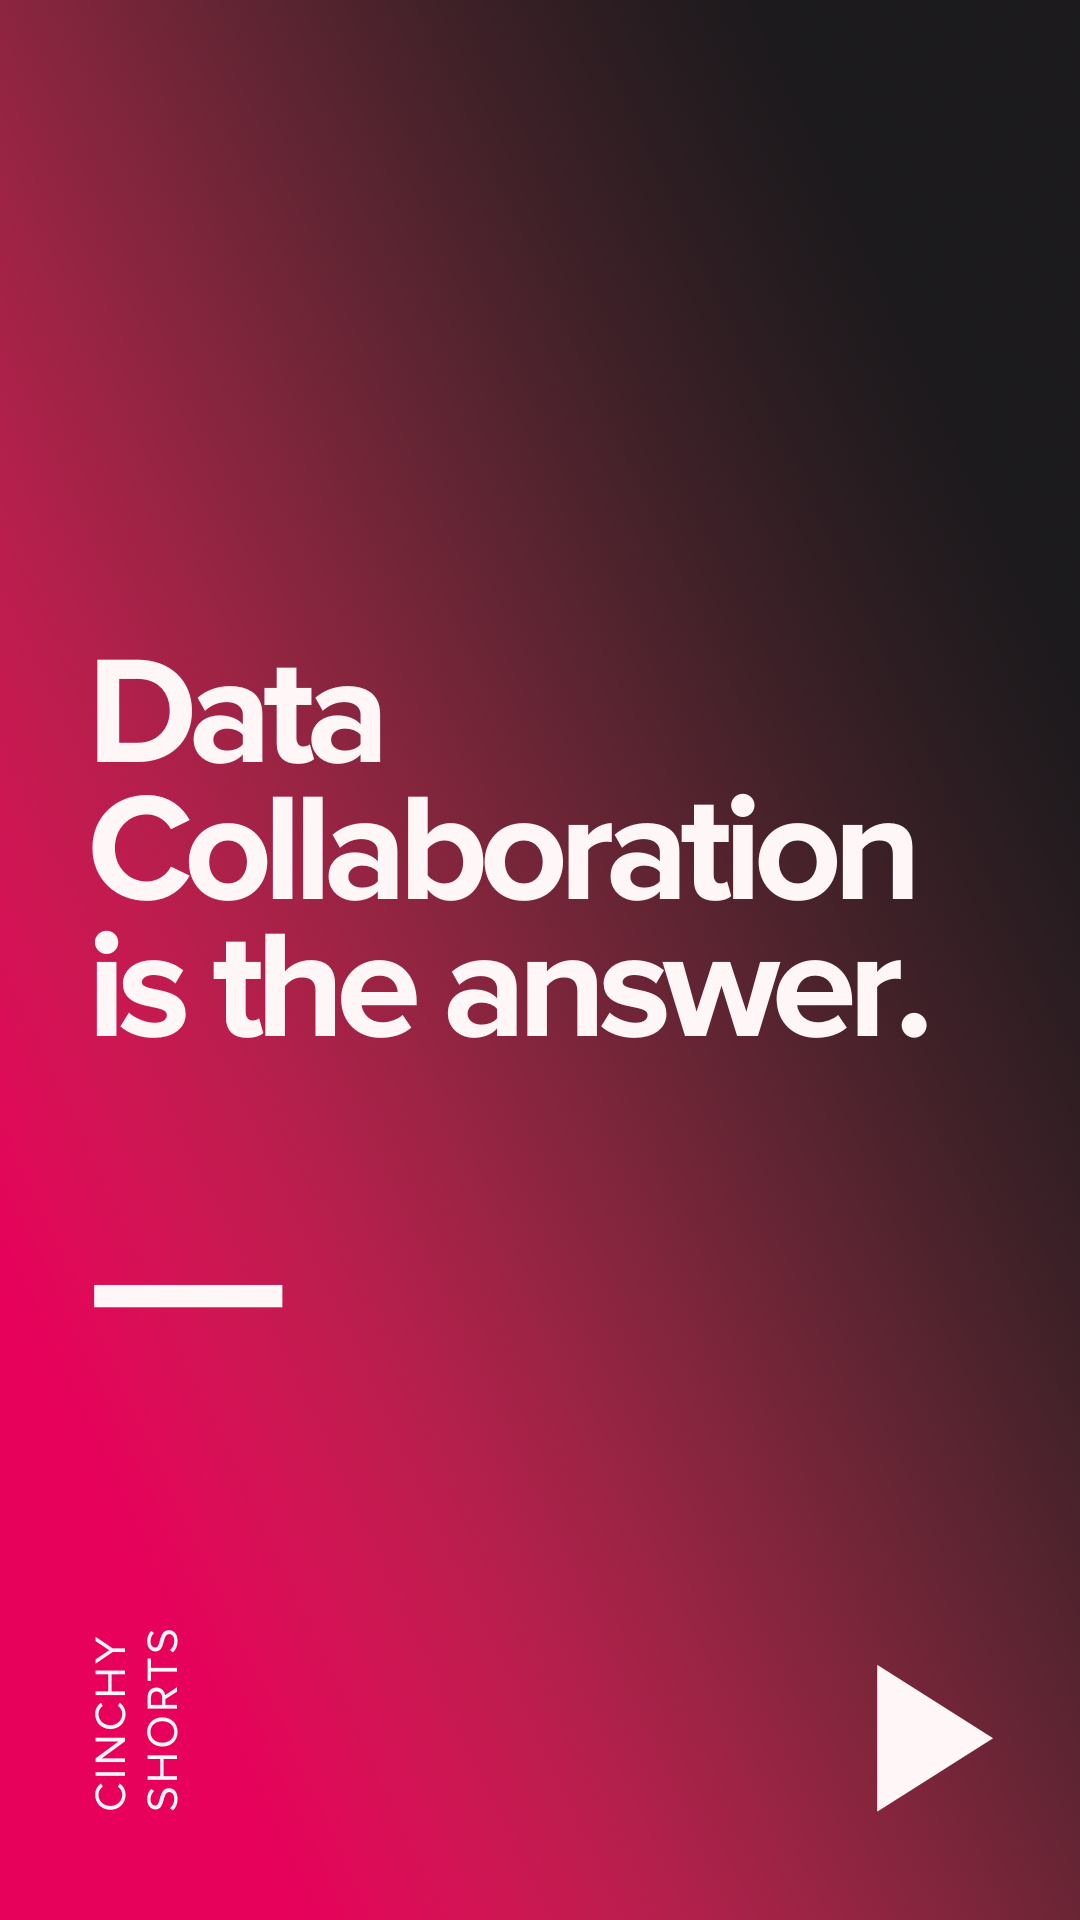 Data Collaboration is the answer.